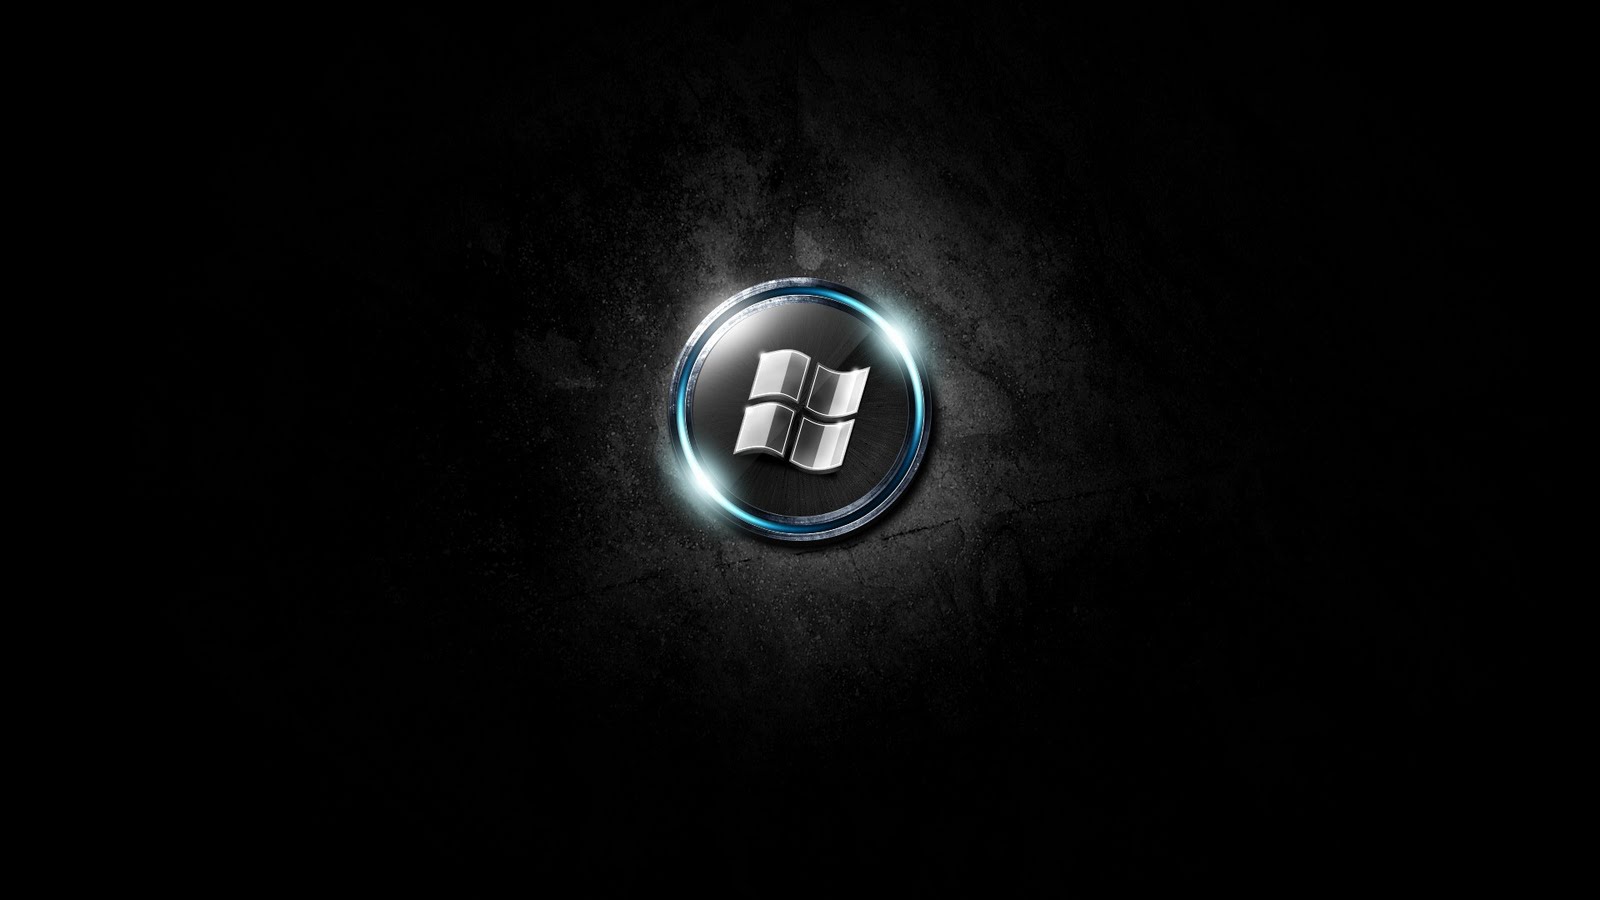 Cool Windows Logo Full HD Wallpaper Is A Great For Your